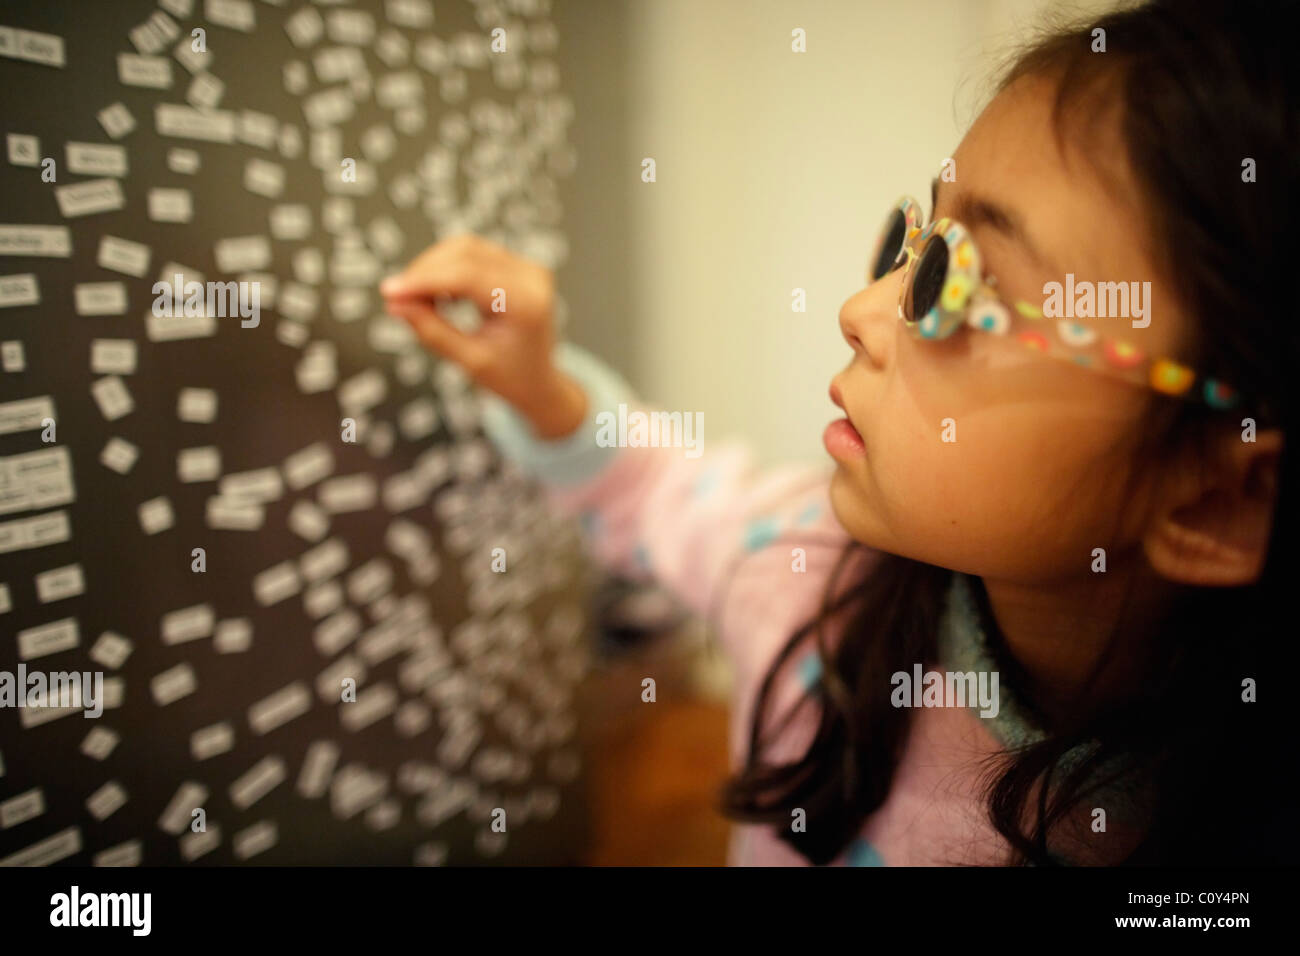 Girl wears sunglasses and plays with magnetic fridge words Stock Photo